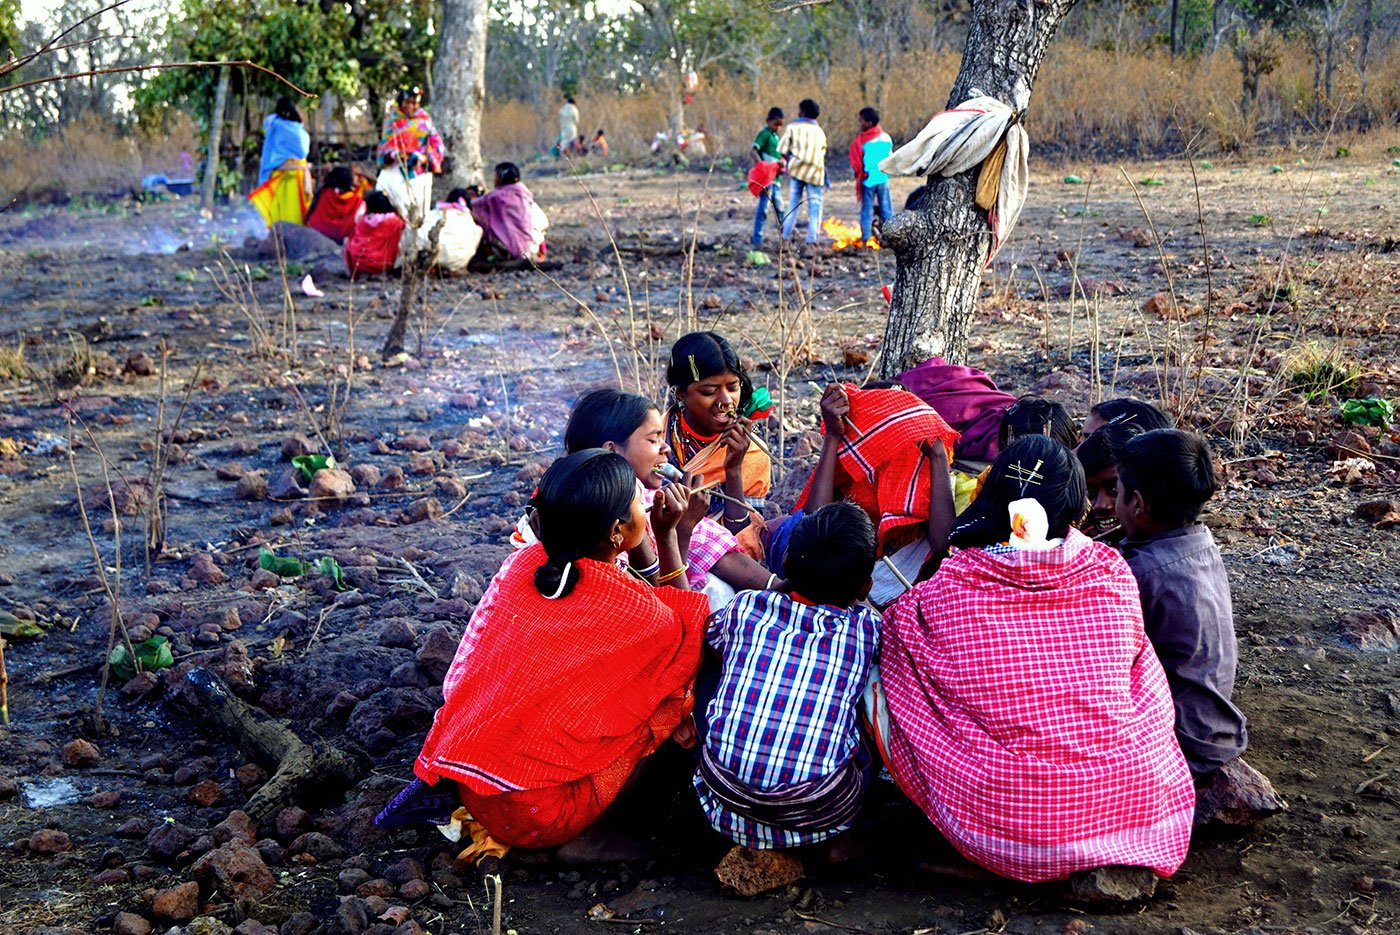 Groups of tribals sitting on the ground after the festivities